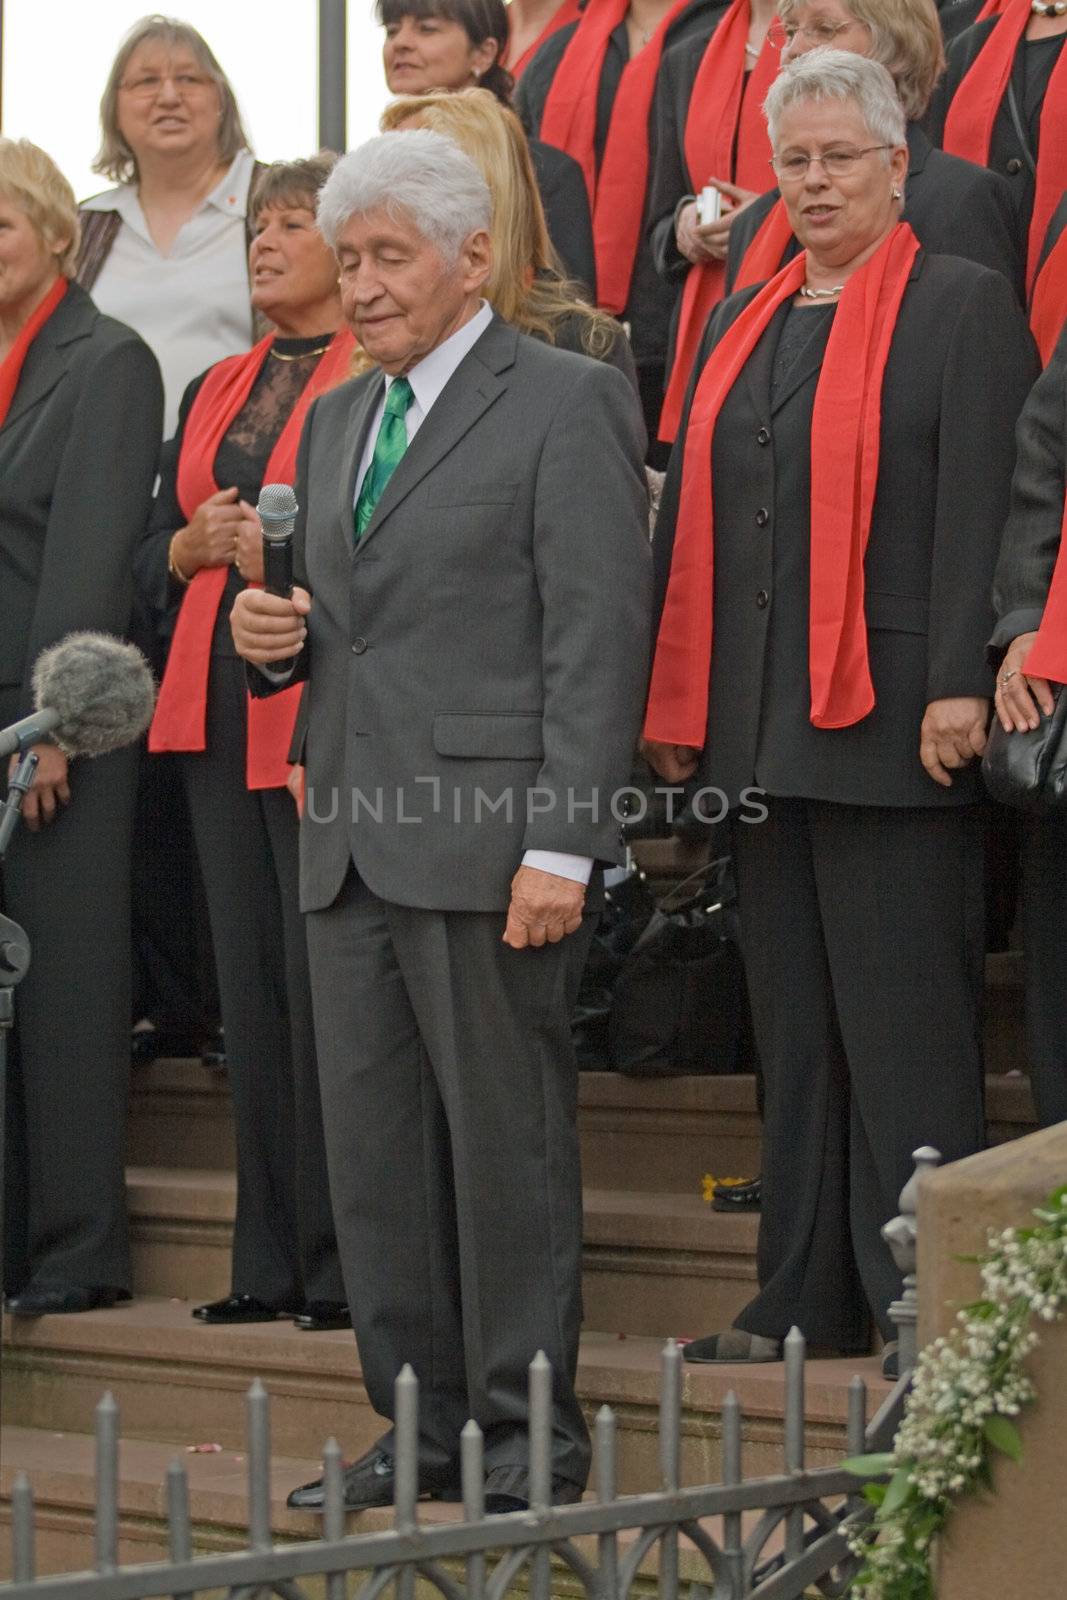 ROSSDORF, GERMANY – APRIL 30: Gotthilf Fischer sings on the occasion of a wedding on April 30, 2011 in Rossdorf, Germany